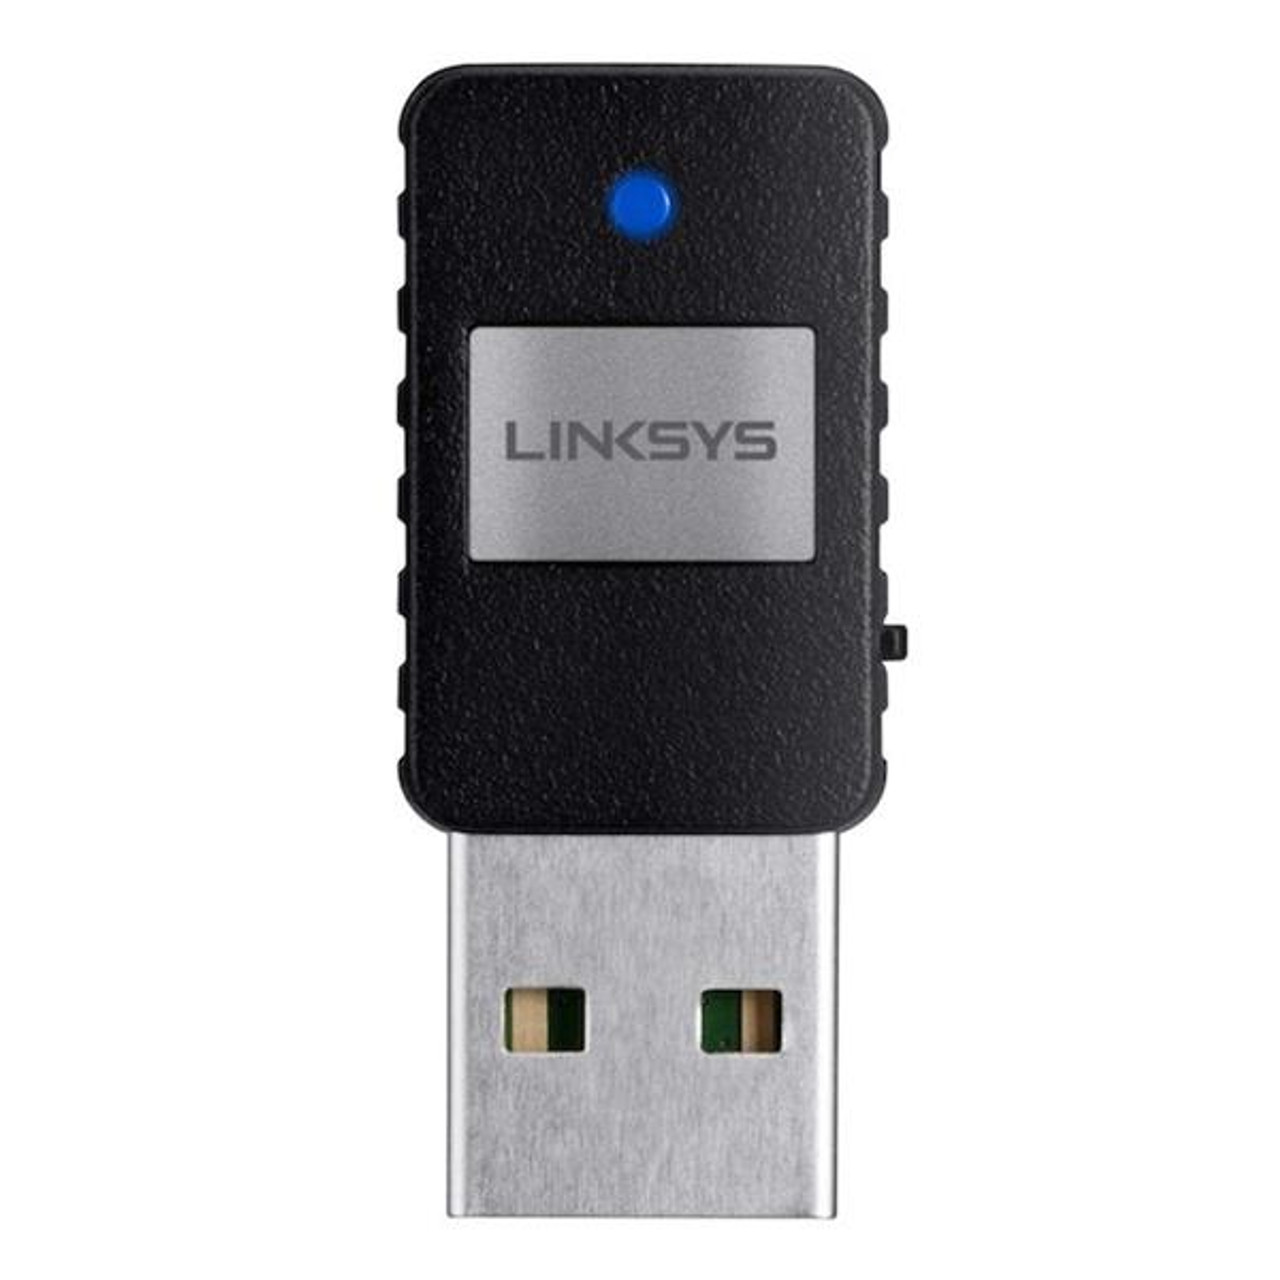 AE6000-EE Linksys Selectable Dual Band AC580 150Mbps 2.4GHz/ 5GHz USB 2.0 Mini Wireless Adapter (Refurbished)